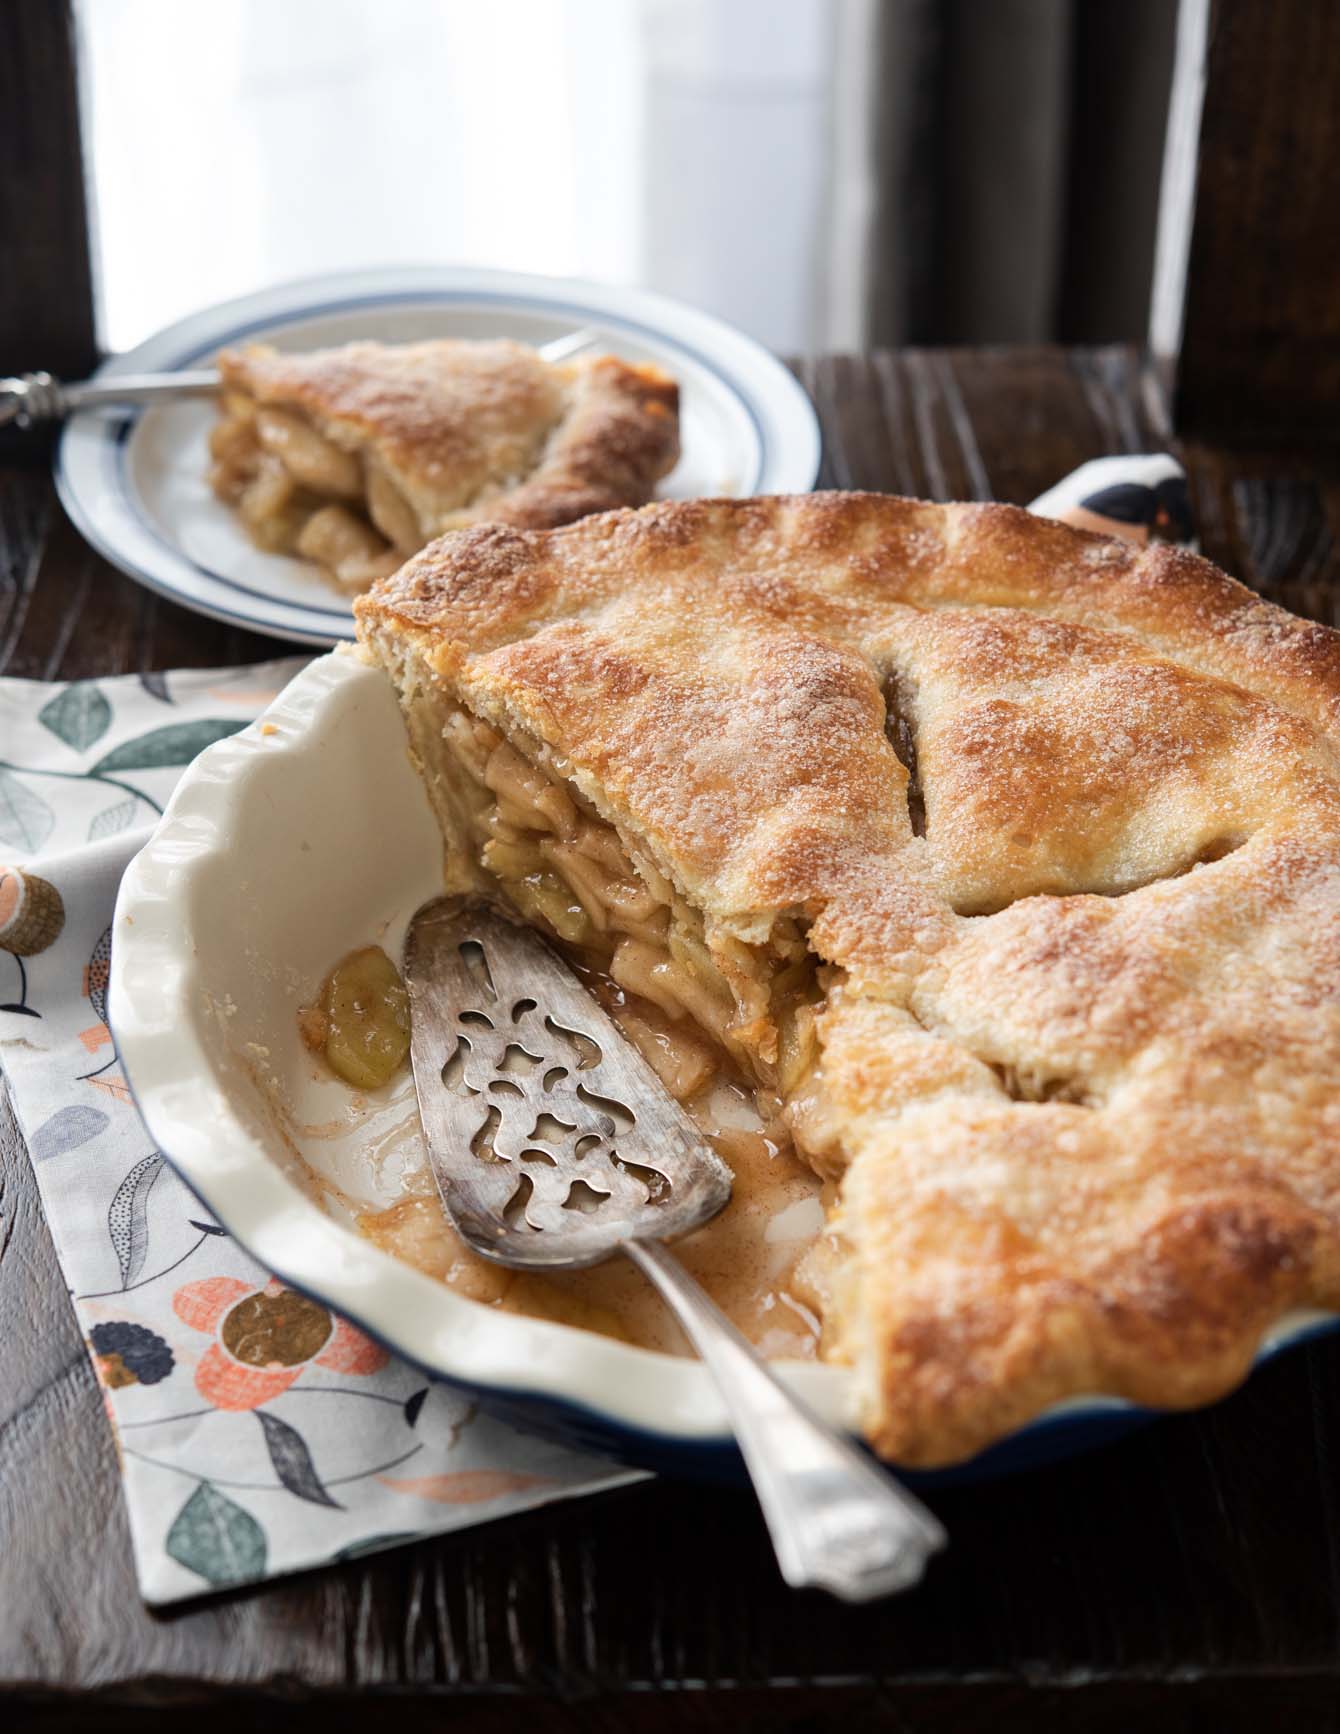 Apple pie in a deep dish pan showing the soft apple filling inside.